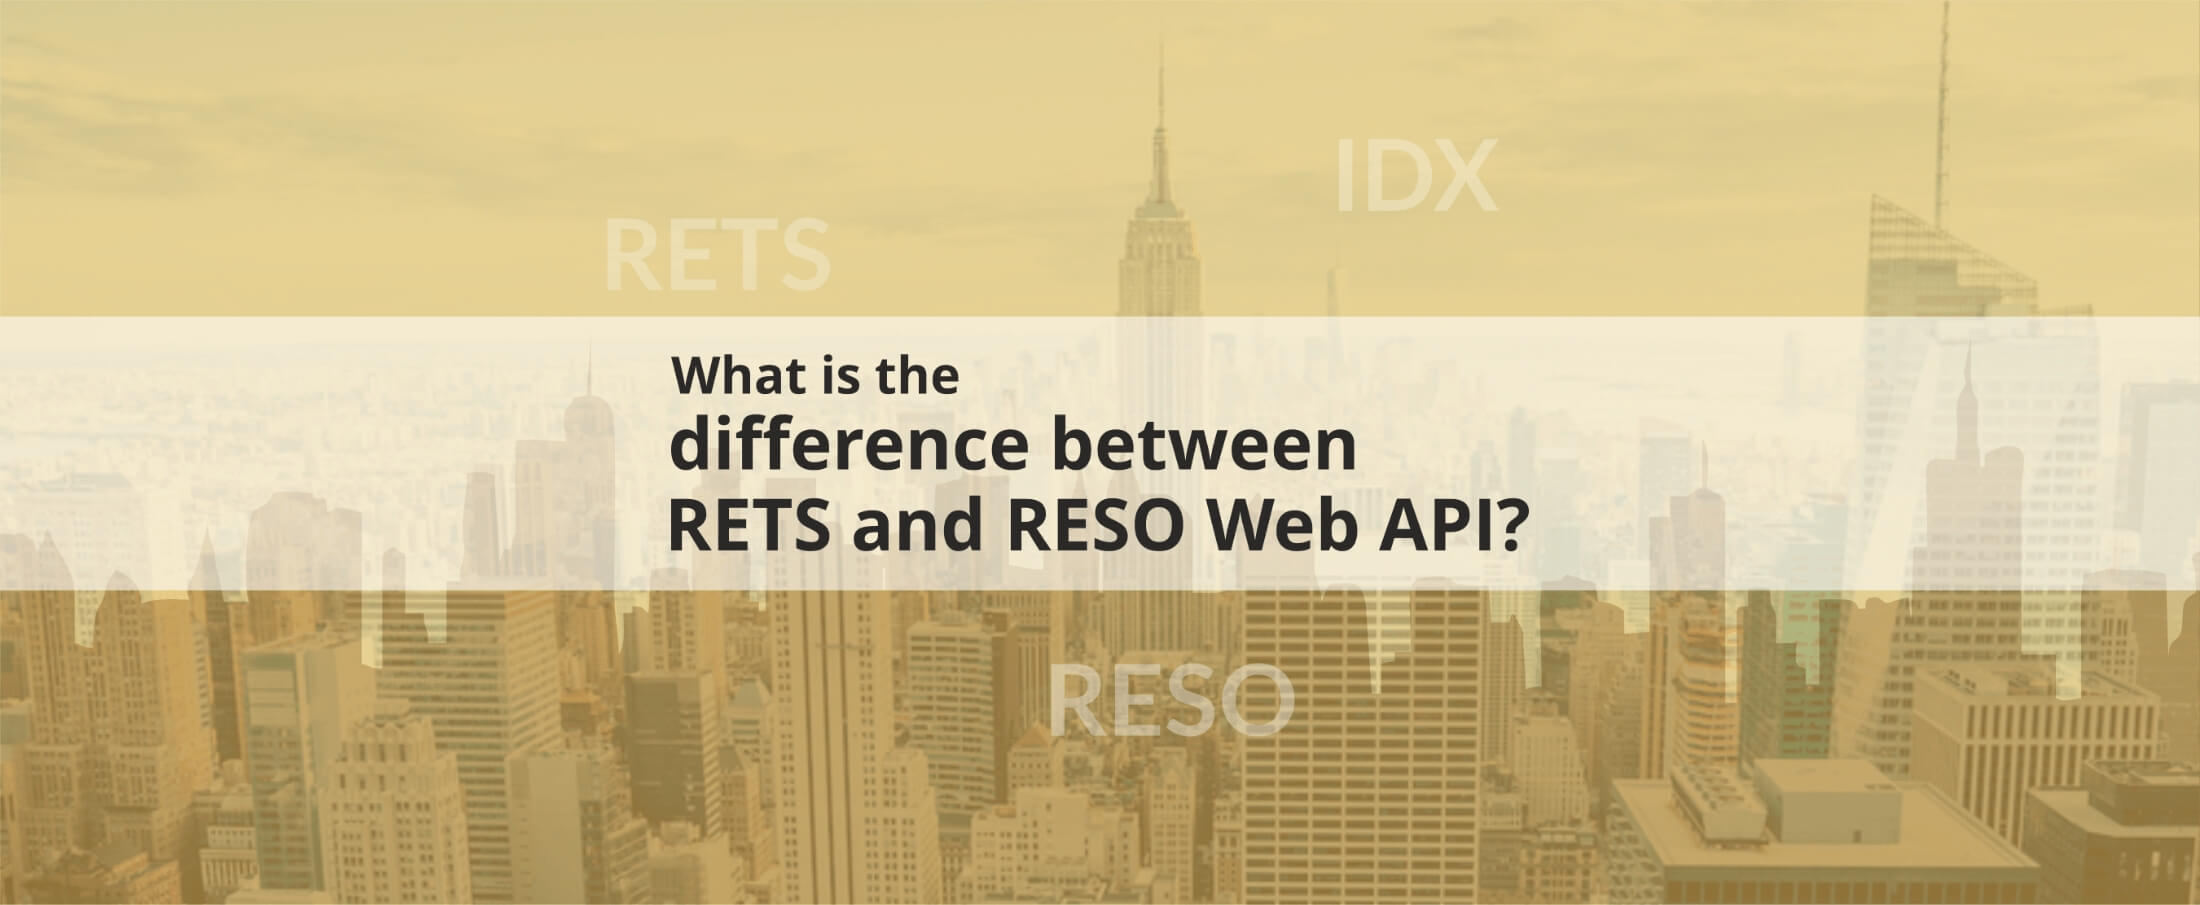 Difference between RETS and RESO